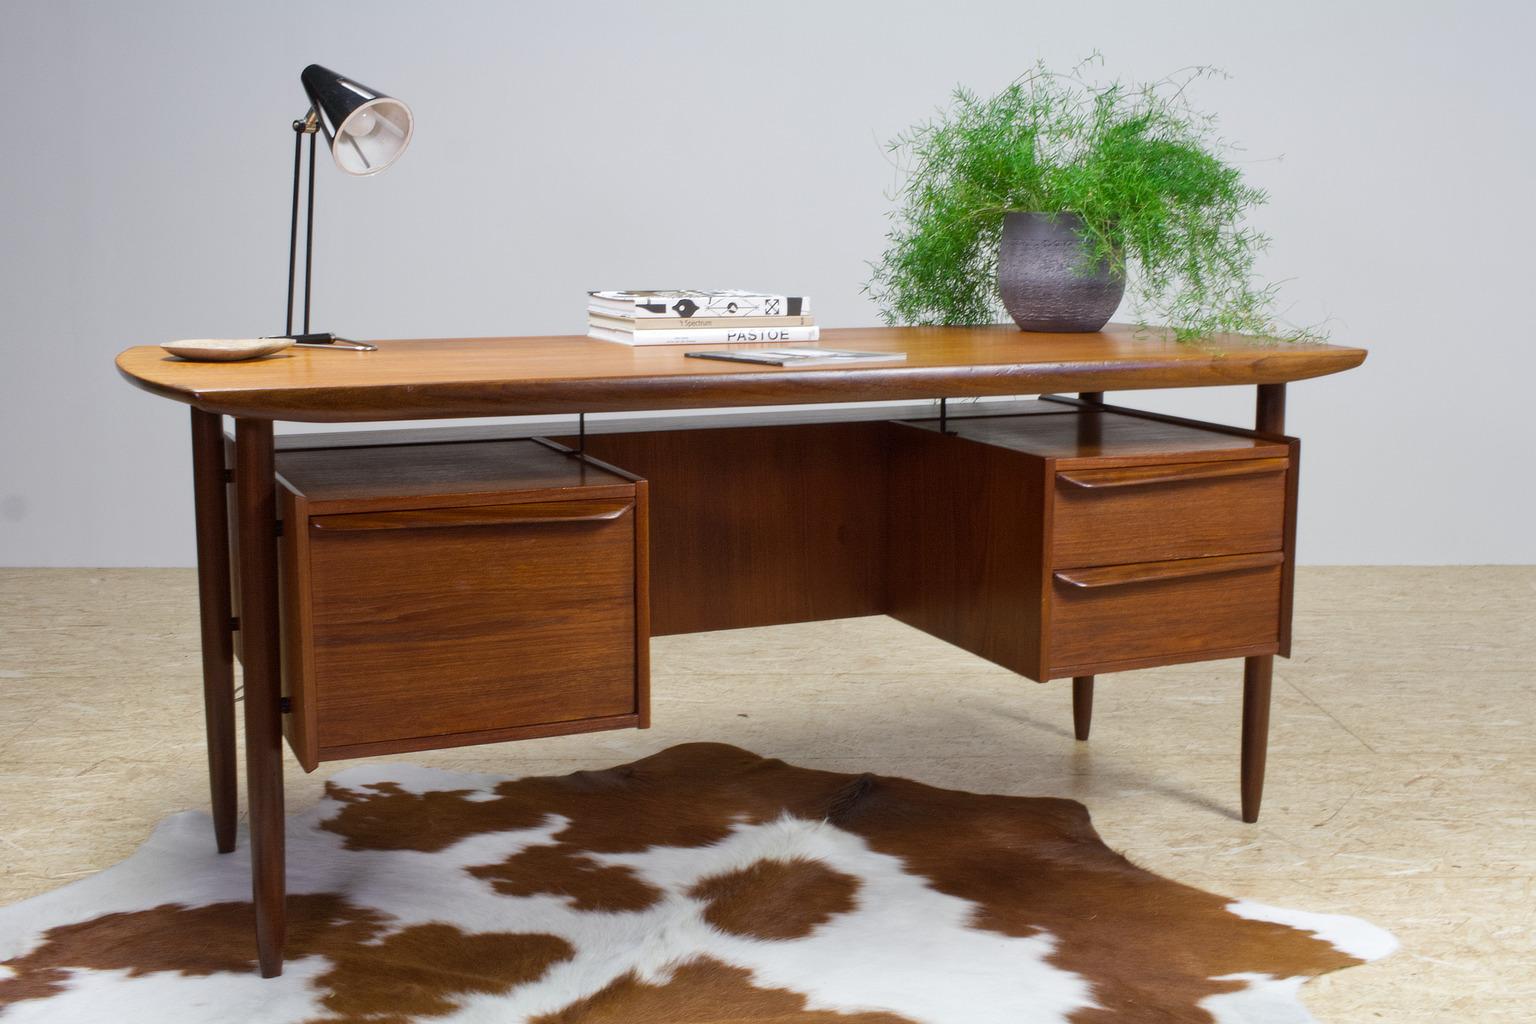 Freestanding 1960s Danish writing desk in solid teak, the design is in manner of Peter Løvig Nielsen. Danish origin, yet designer unknown. The desk has an open storage compartment in the back, which makes this a great object to stand alone in your